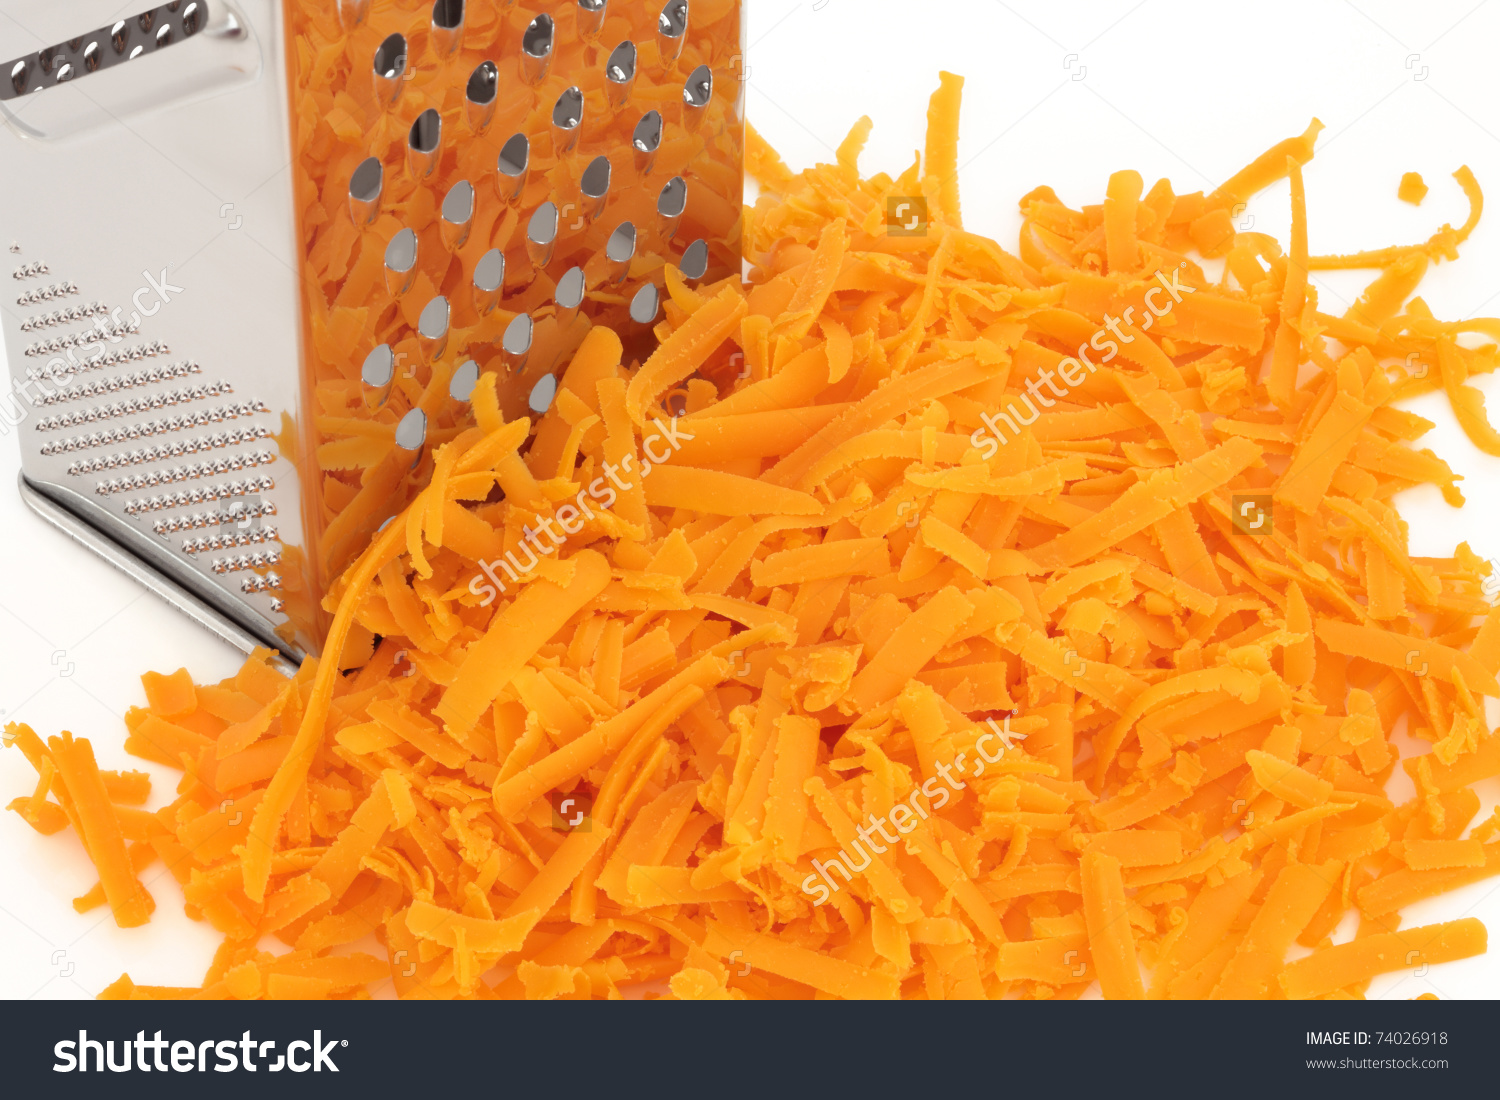 Grated Red Leicester Cheddar Cheese, With Stainless Steel Grater.